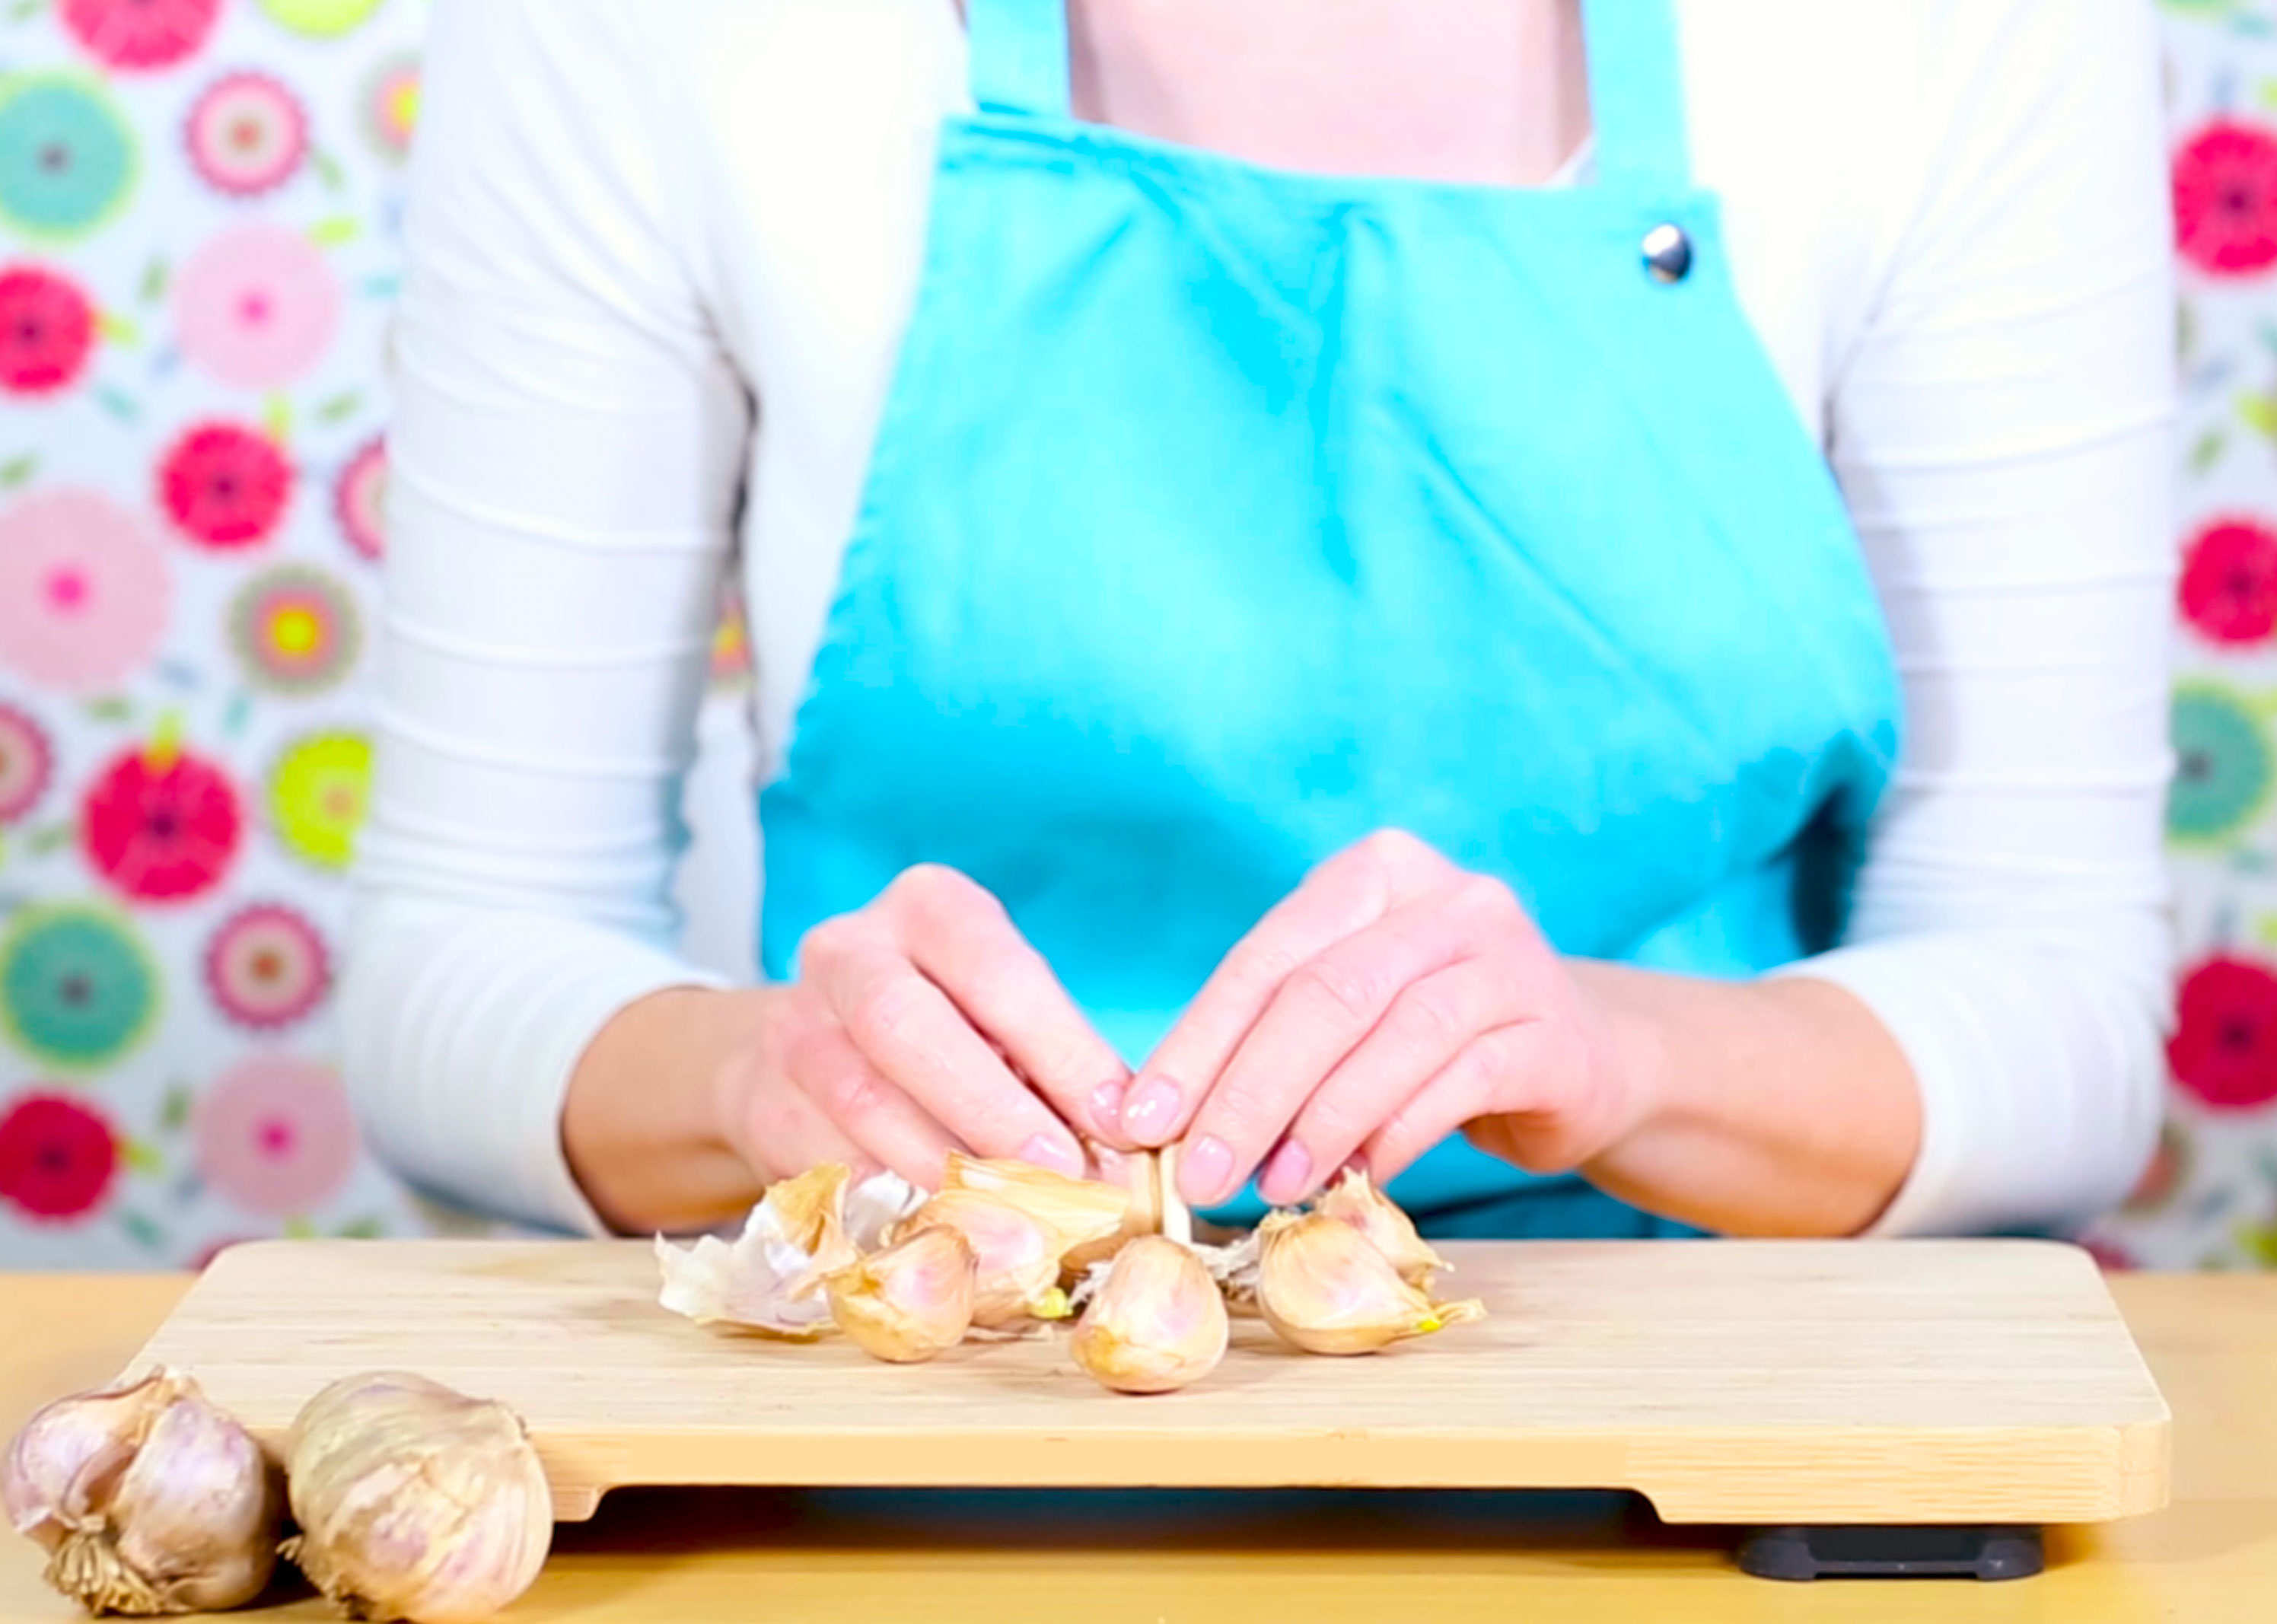 VIDEO: How to Peel Garlic in Bulk Super Fast - Everything Zoomer